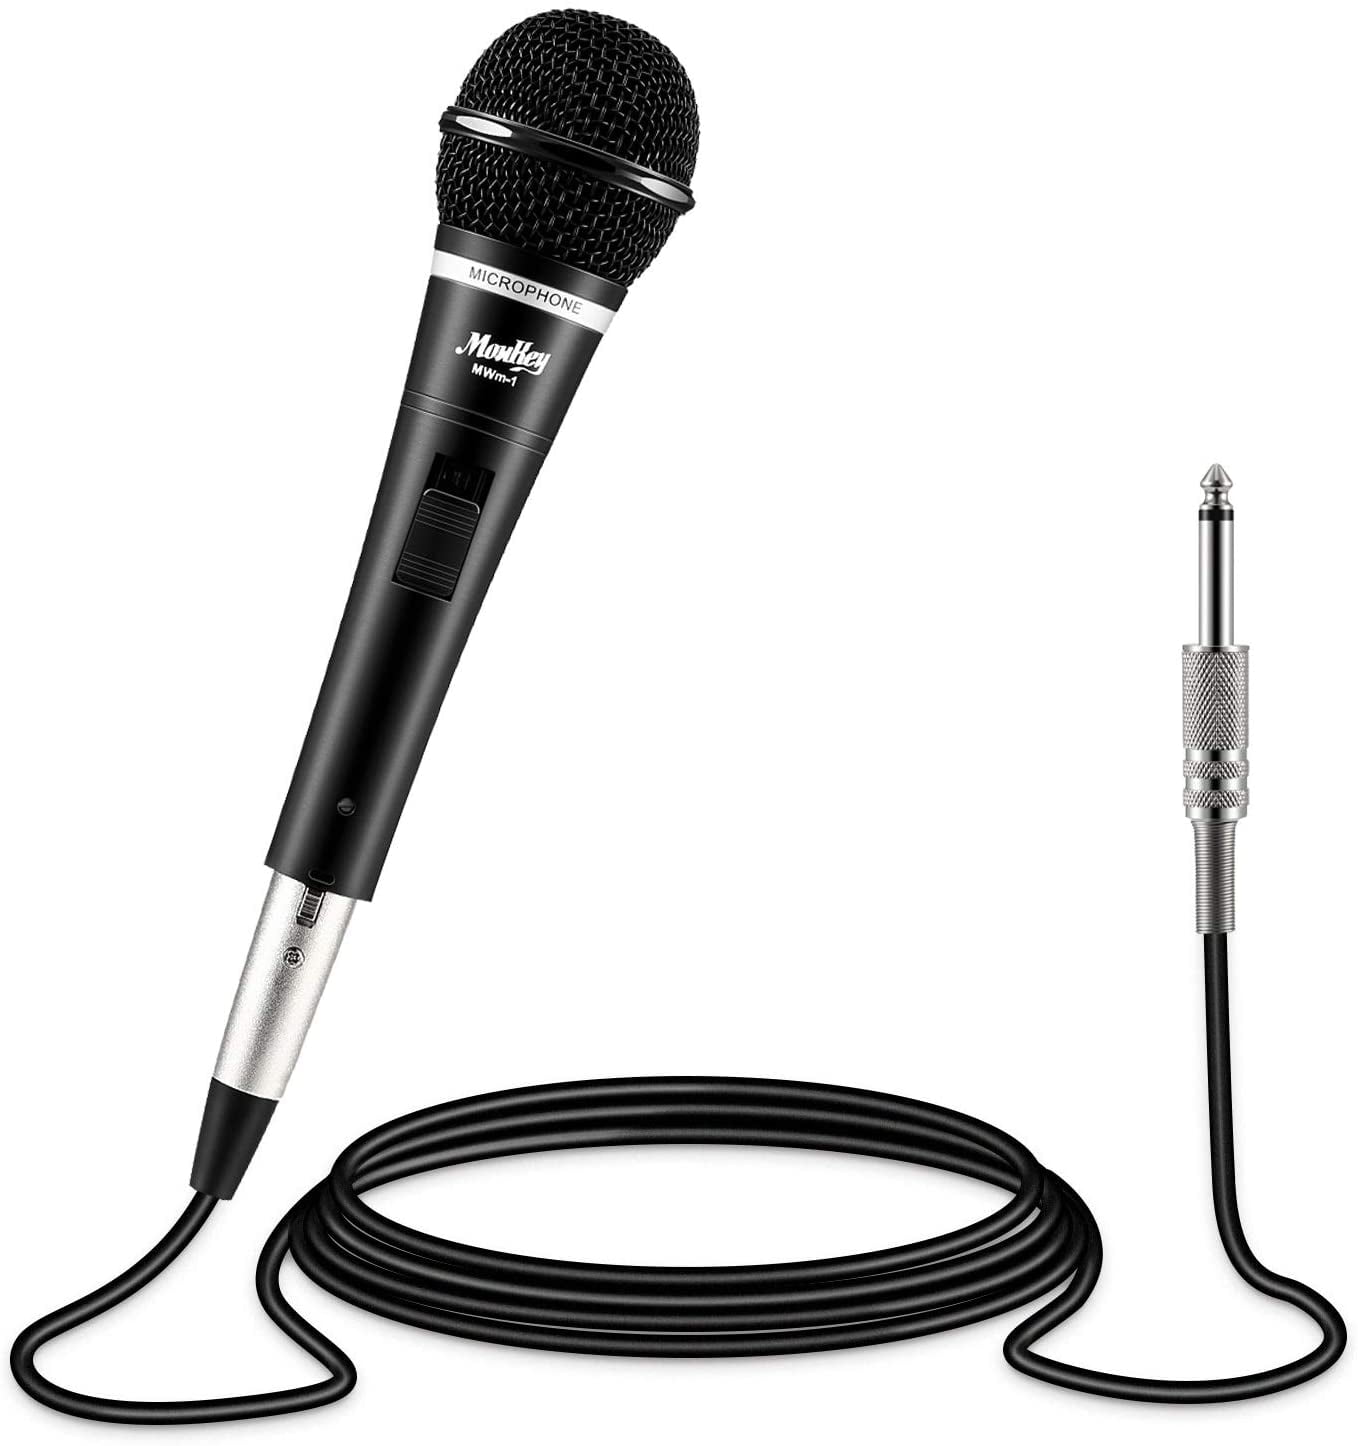 Mugig Dynamic Microphone Stage Performance Vocal Microphone for Karaoke Include 16ft XLR to QTR Cable Cardioid Public Speaking Recording Uni-Directional 